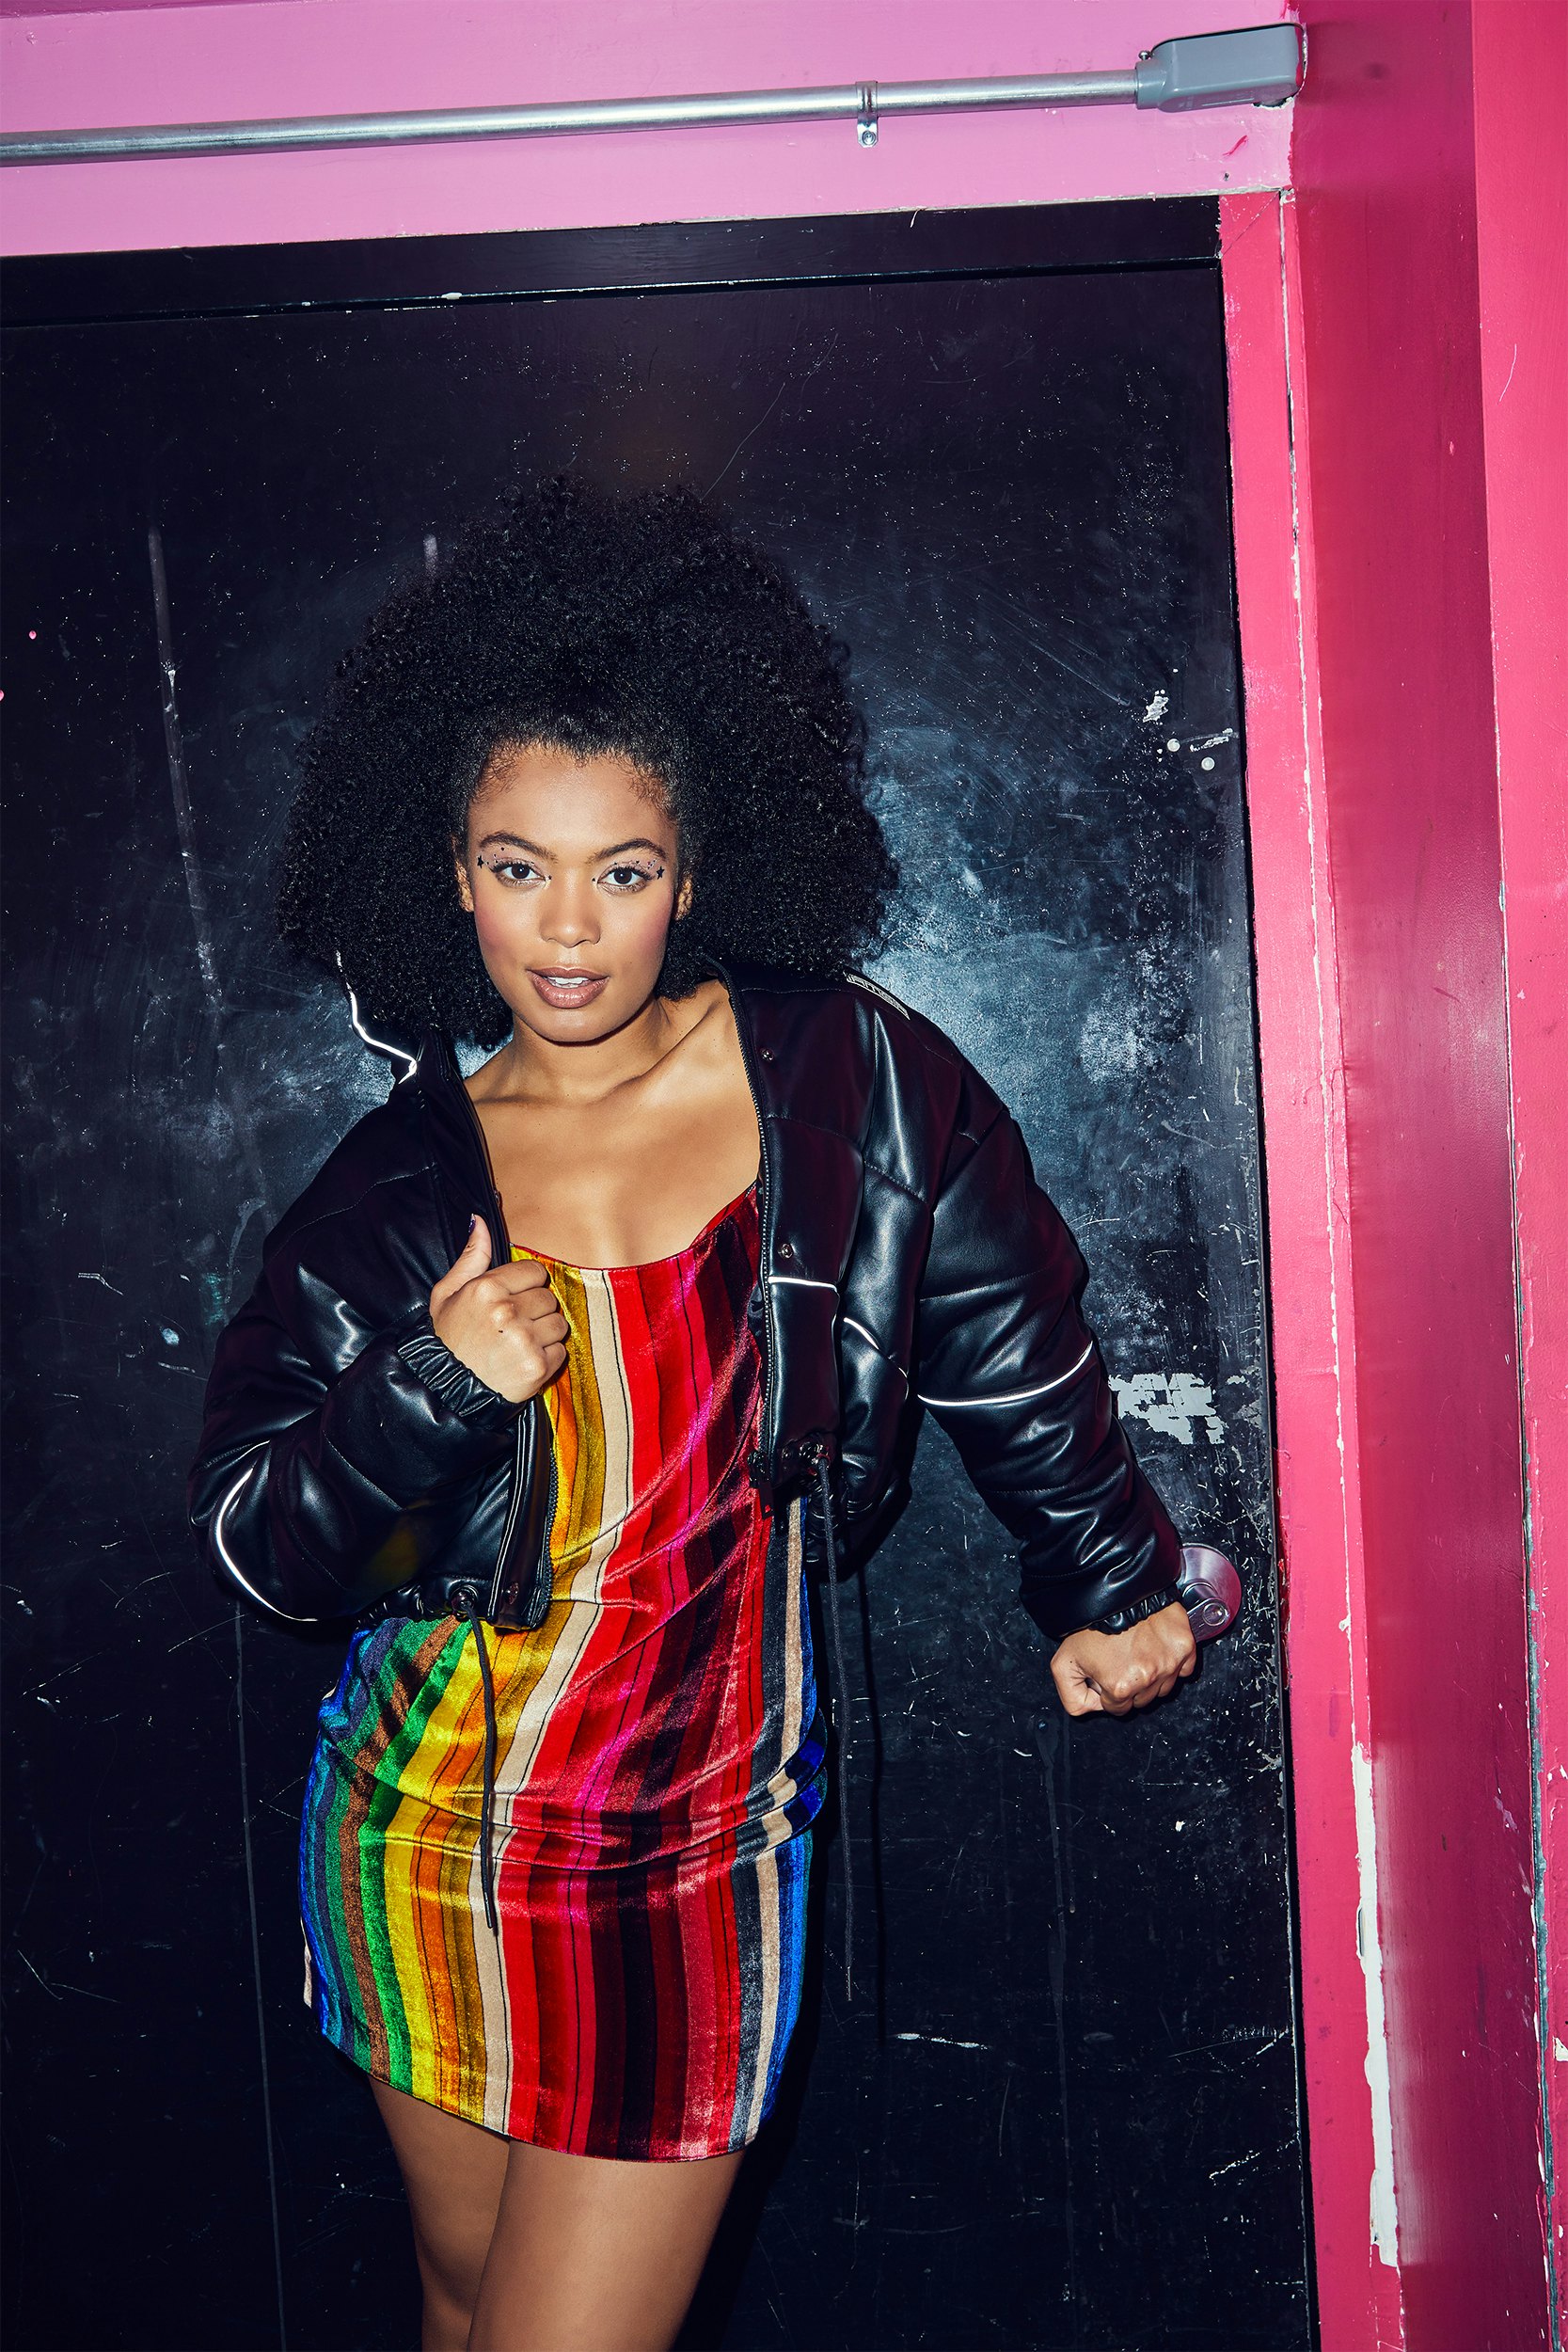 Discussion jaz sinclair: the prettiest bitch in hollywood.